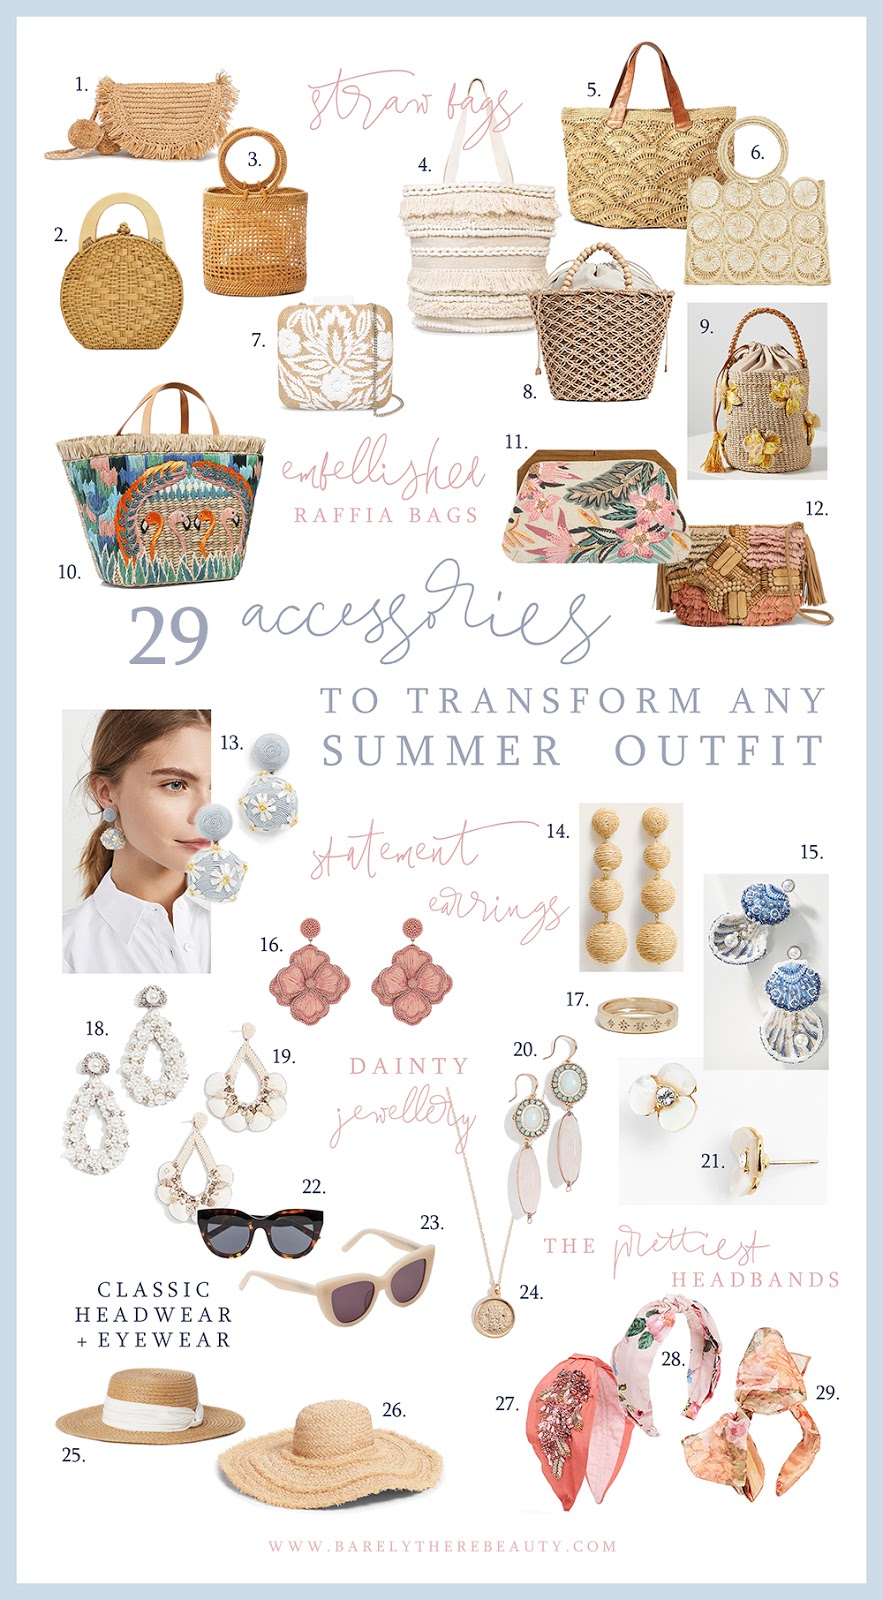 29 Accessories To Transform Any Summer Outfit. | Barely There Beauty - A  Lifestyle Blog from the Home Counties